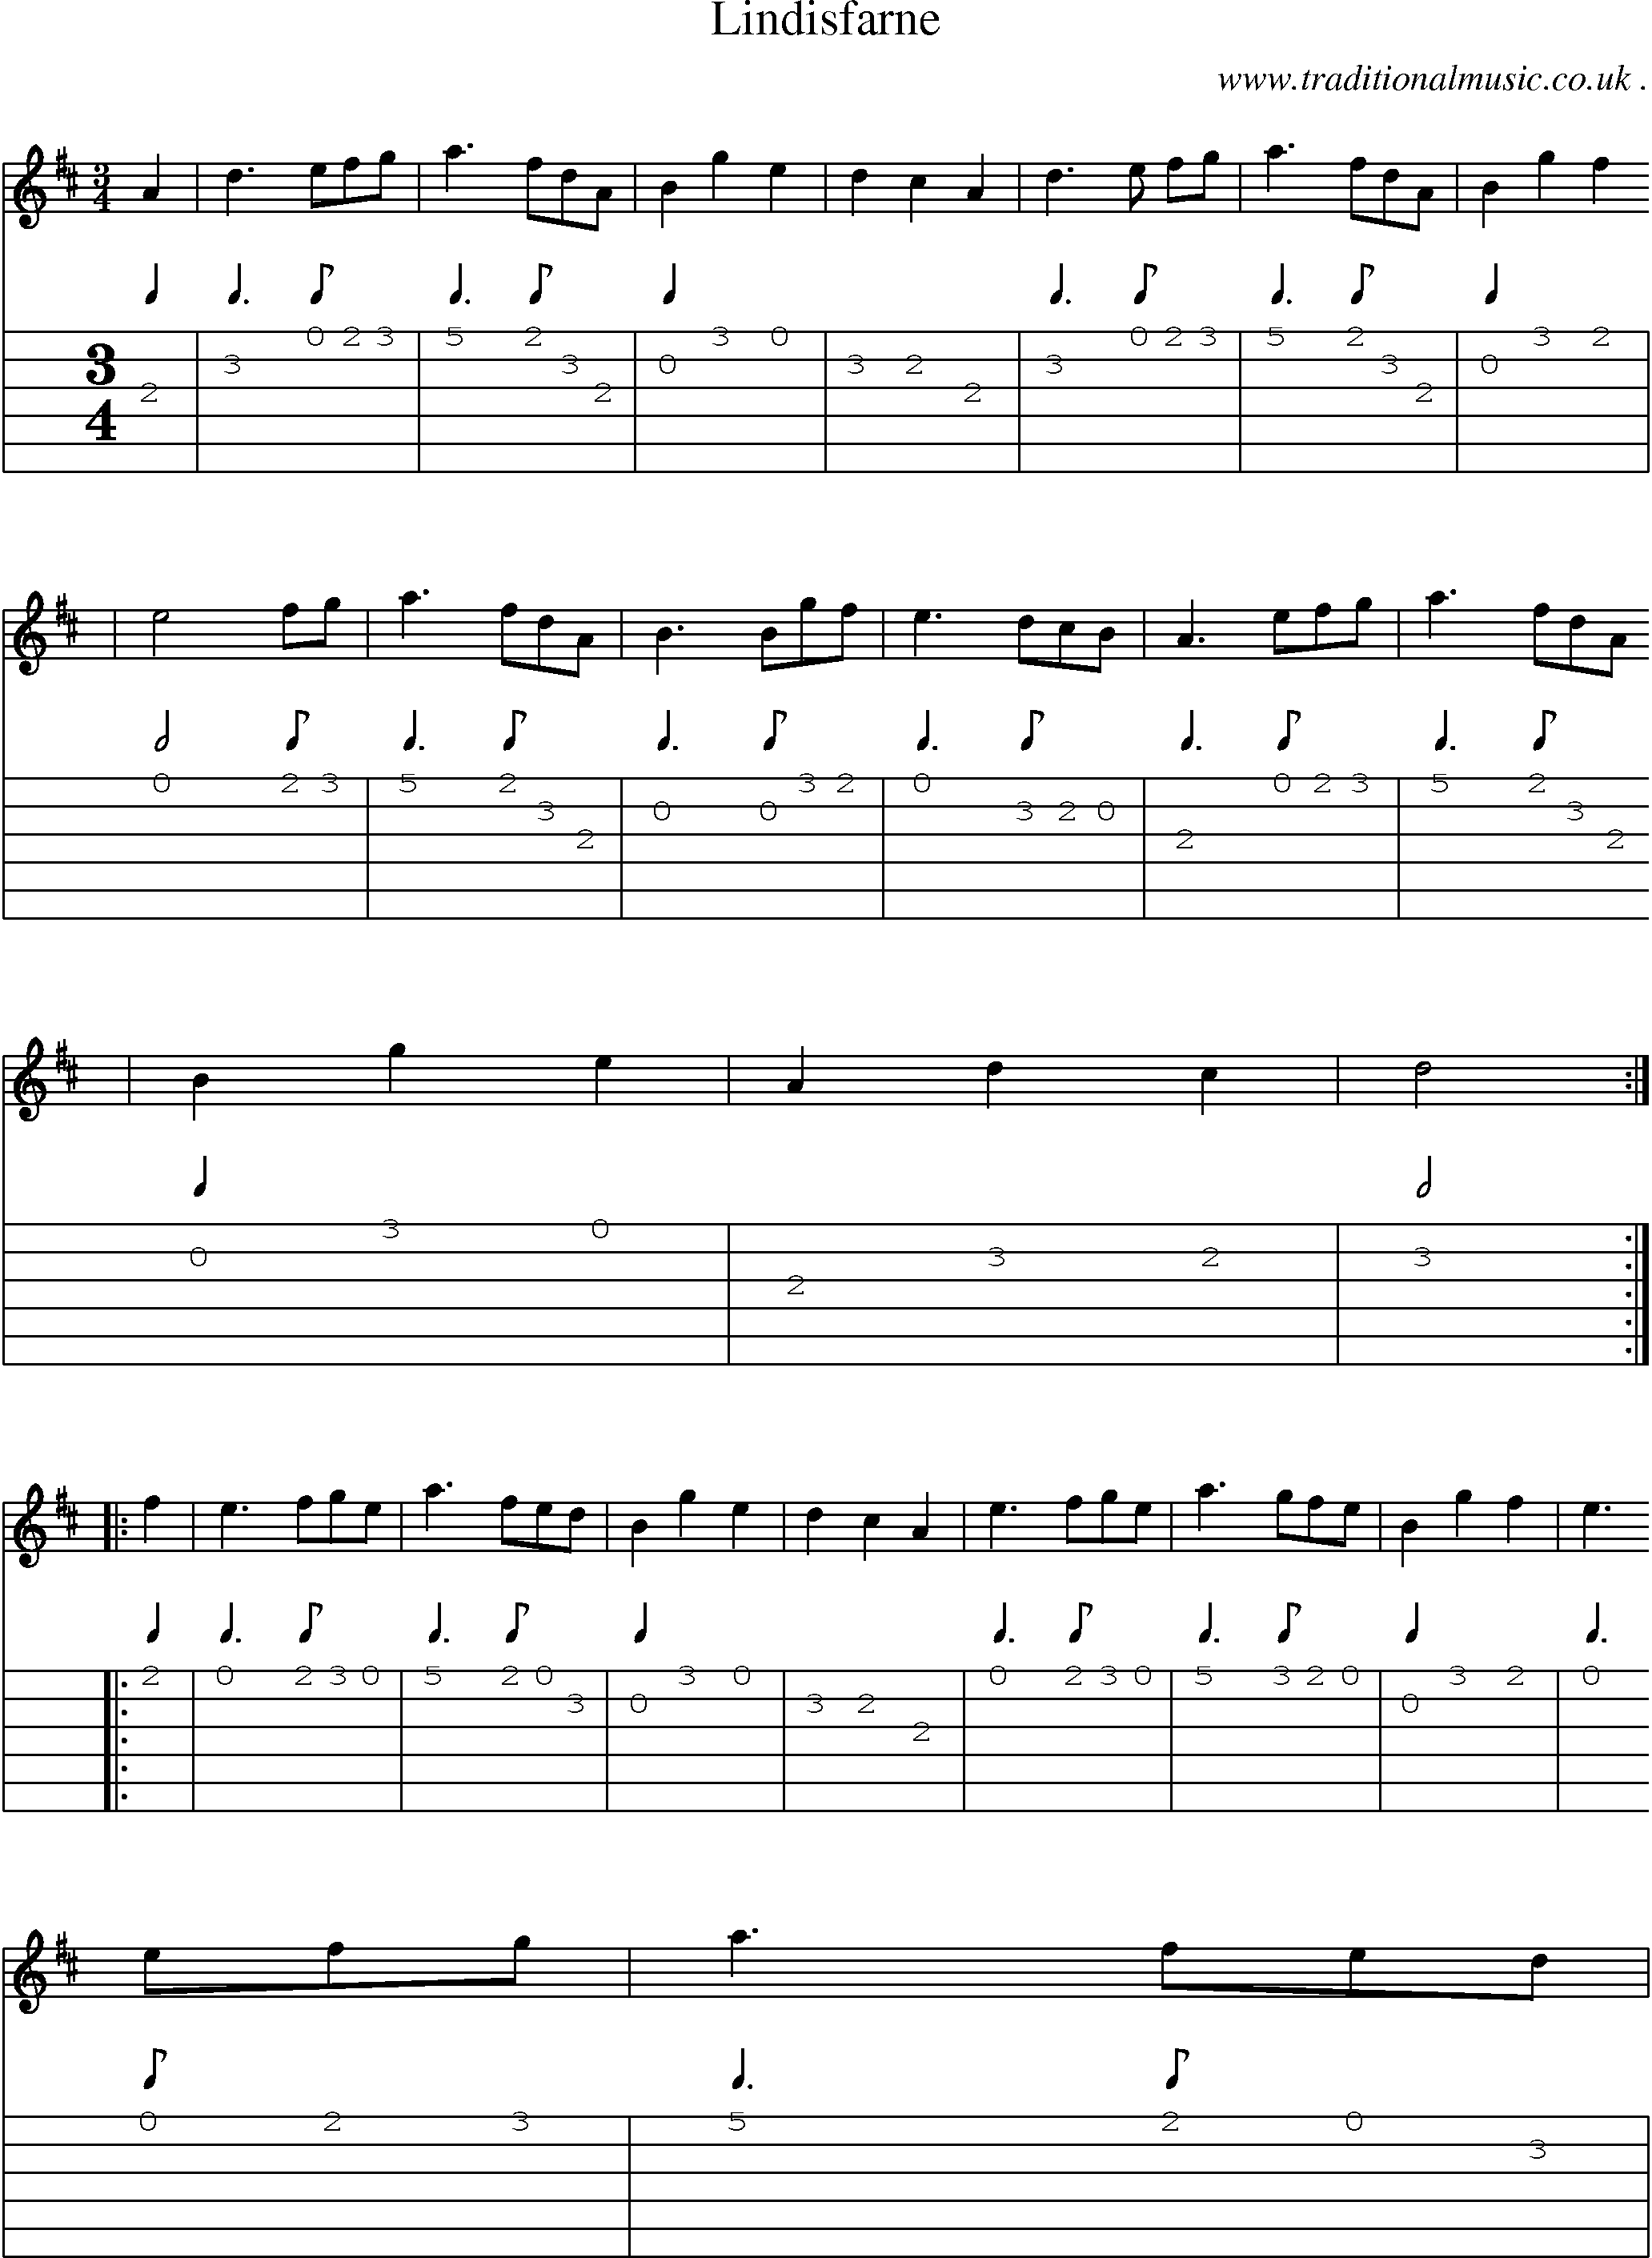 Sheet-Music and Guitar Tabs for Lindisfarne